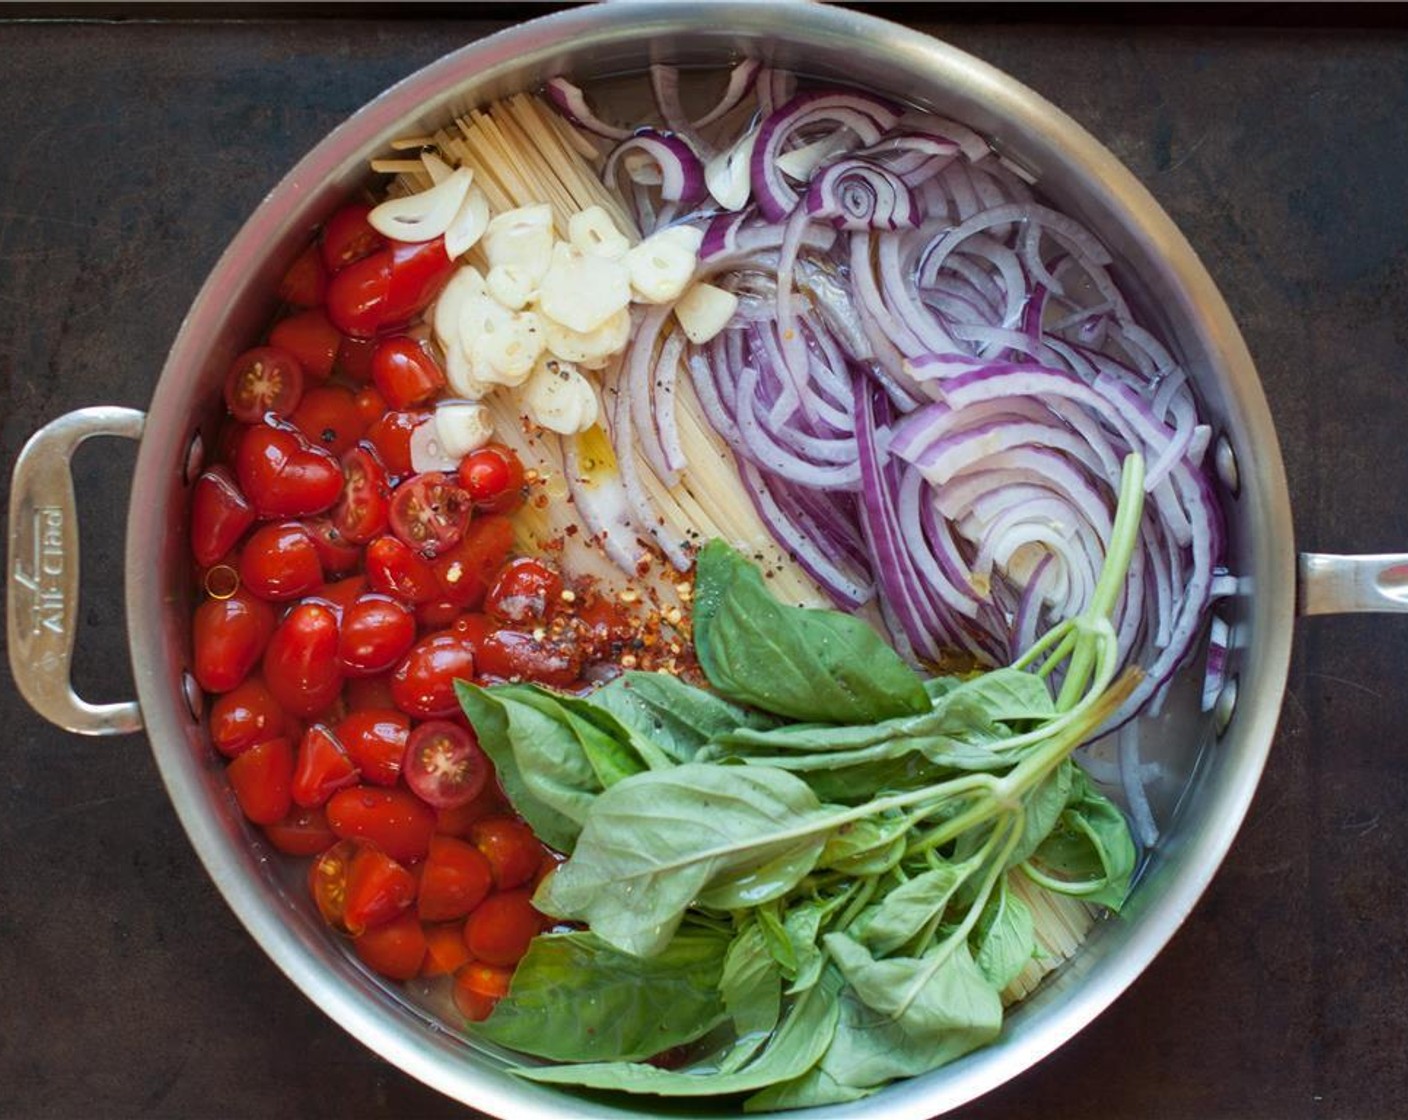 step 1 Put the Linguine (12 oz), Cherry Tomatoes (2 1/4 cups), Red Onion (1), Sea Salt (1/2 Tbsp), Ground Black Pepper (1/4 tsp), Garlic (4 cloves), Crushed Red Pepper Flakes (1/2 tsp), Extra-Virgin Olive Oil (2 Tbsp), and Fresh Basil (2 sprigs) in a large pot.